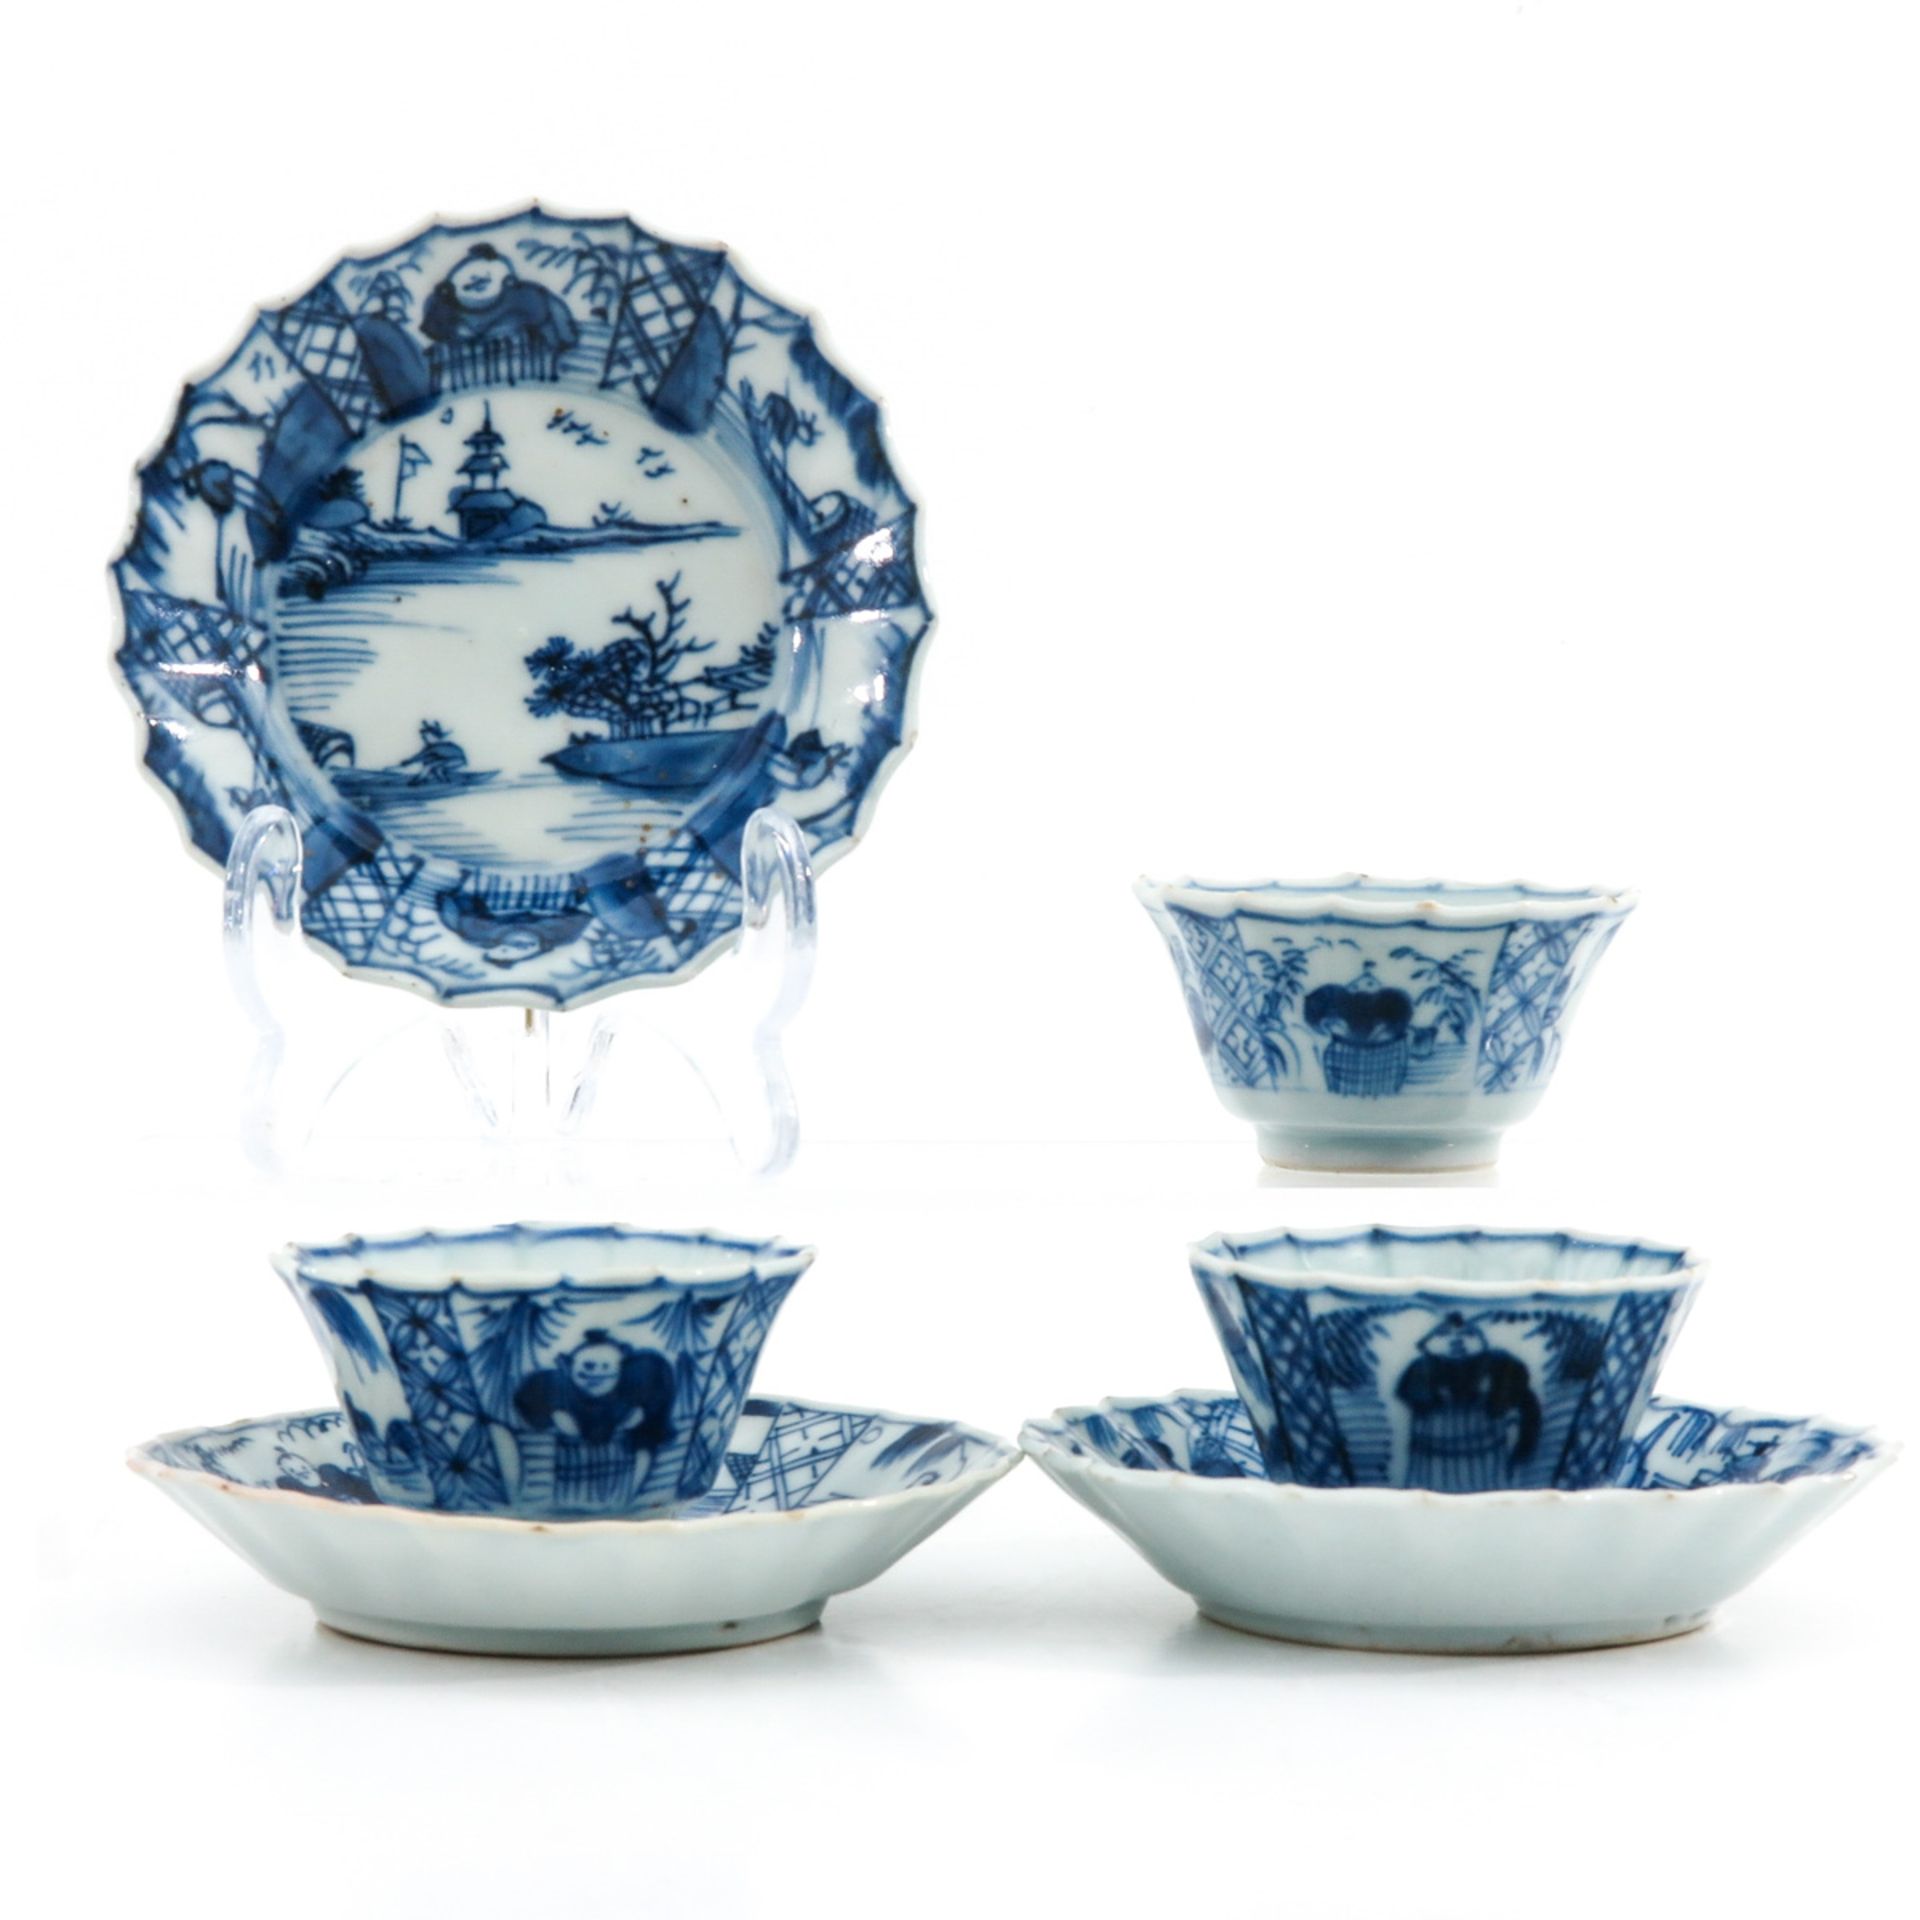 A Set of 3 Cups and Saucers